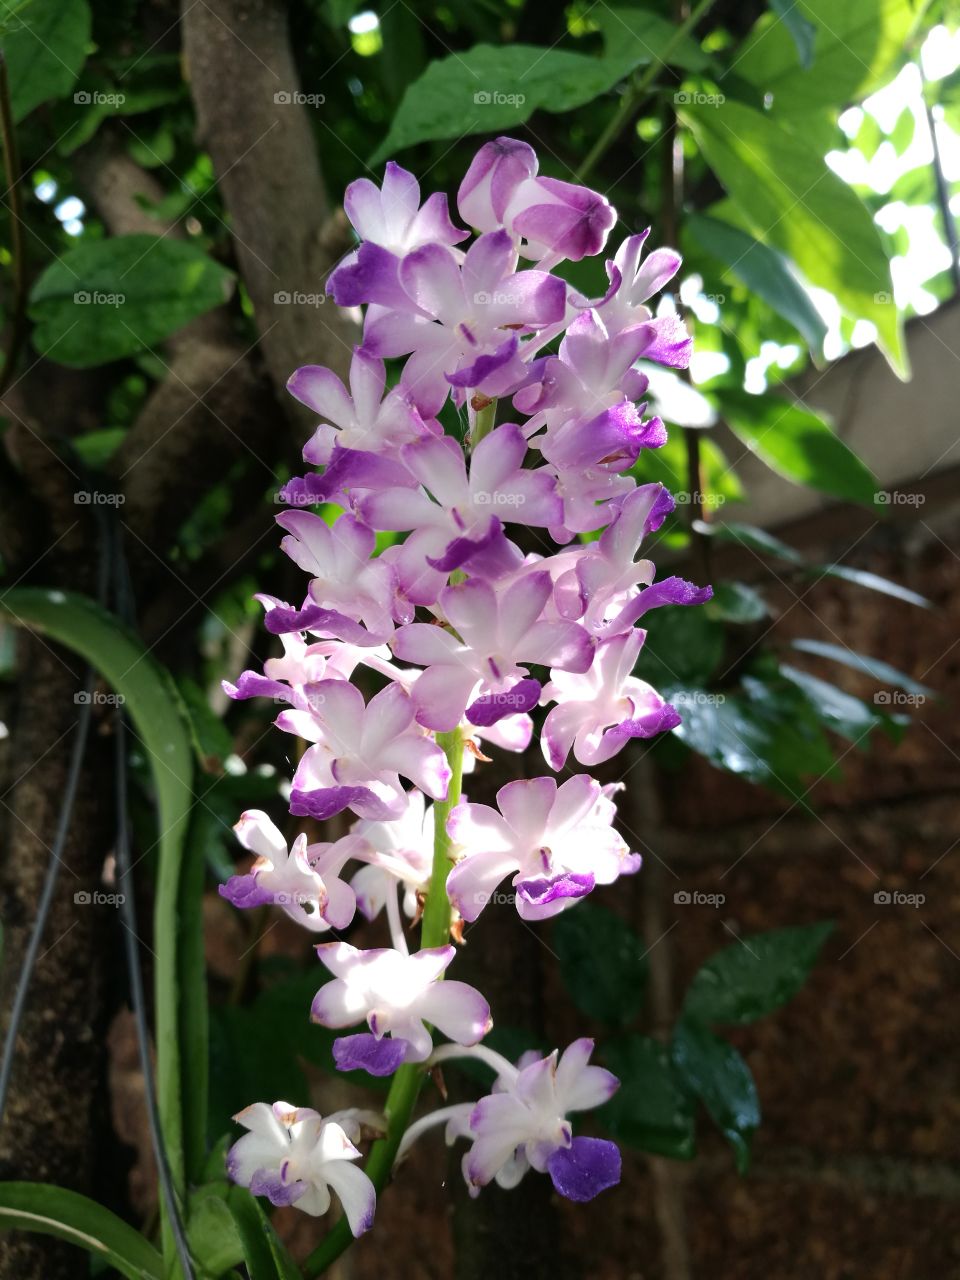 The blooming of wild orchids with purple and white flowers.